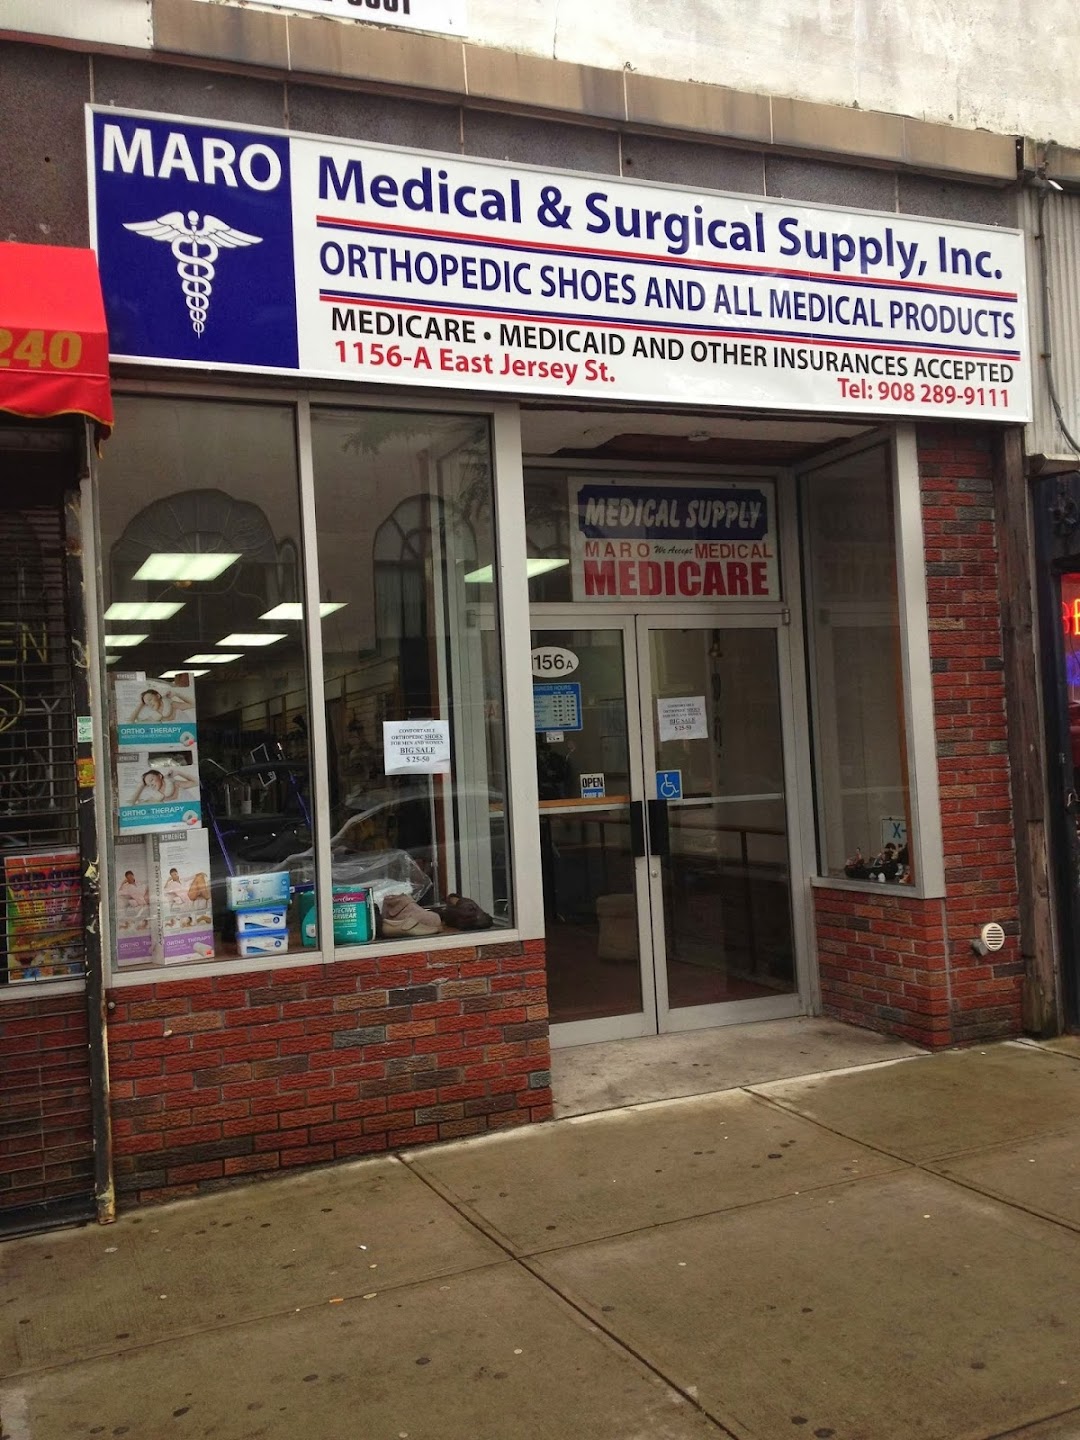 Maro Medical & Surgical